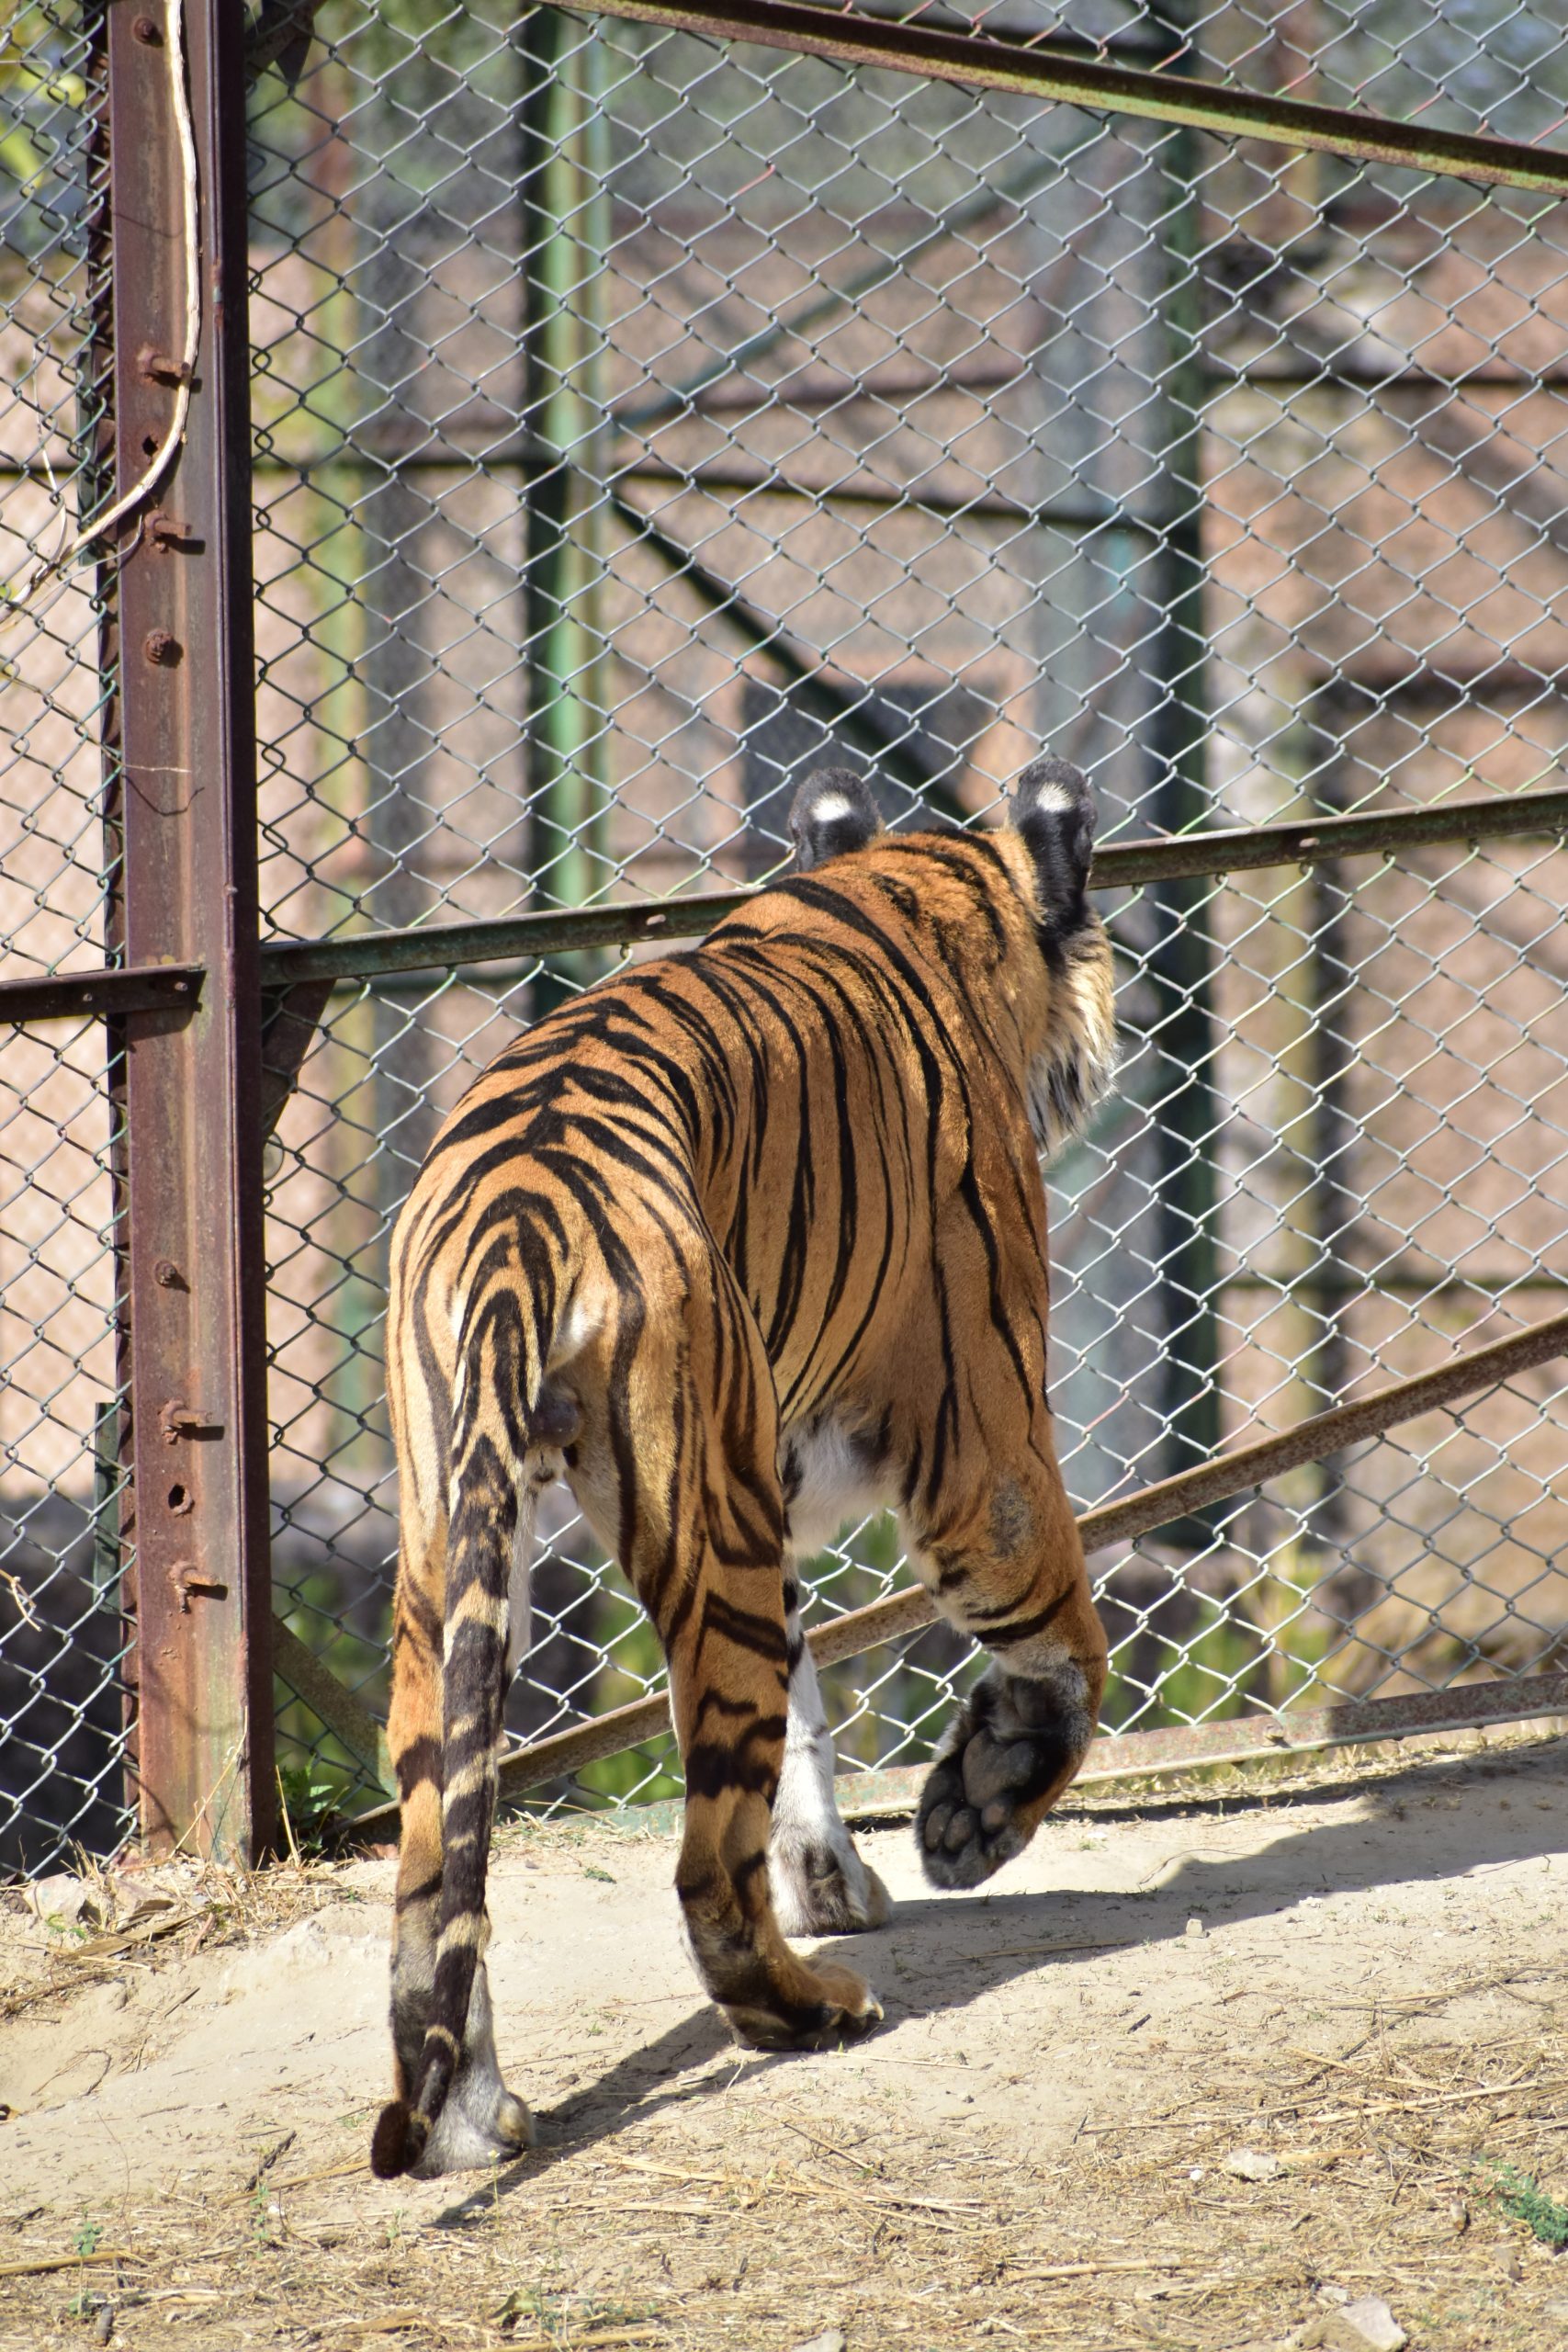 Tiger in the cage